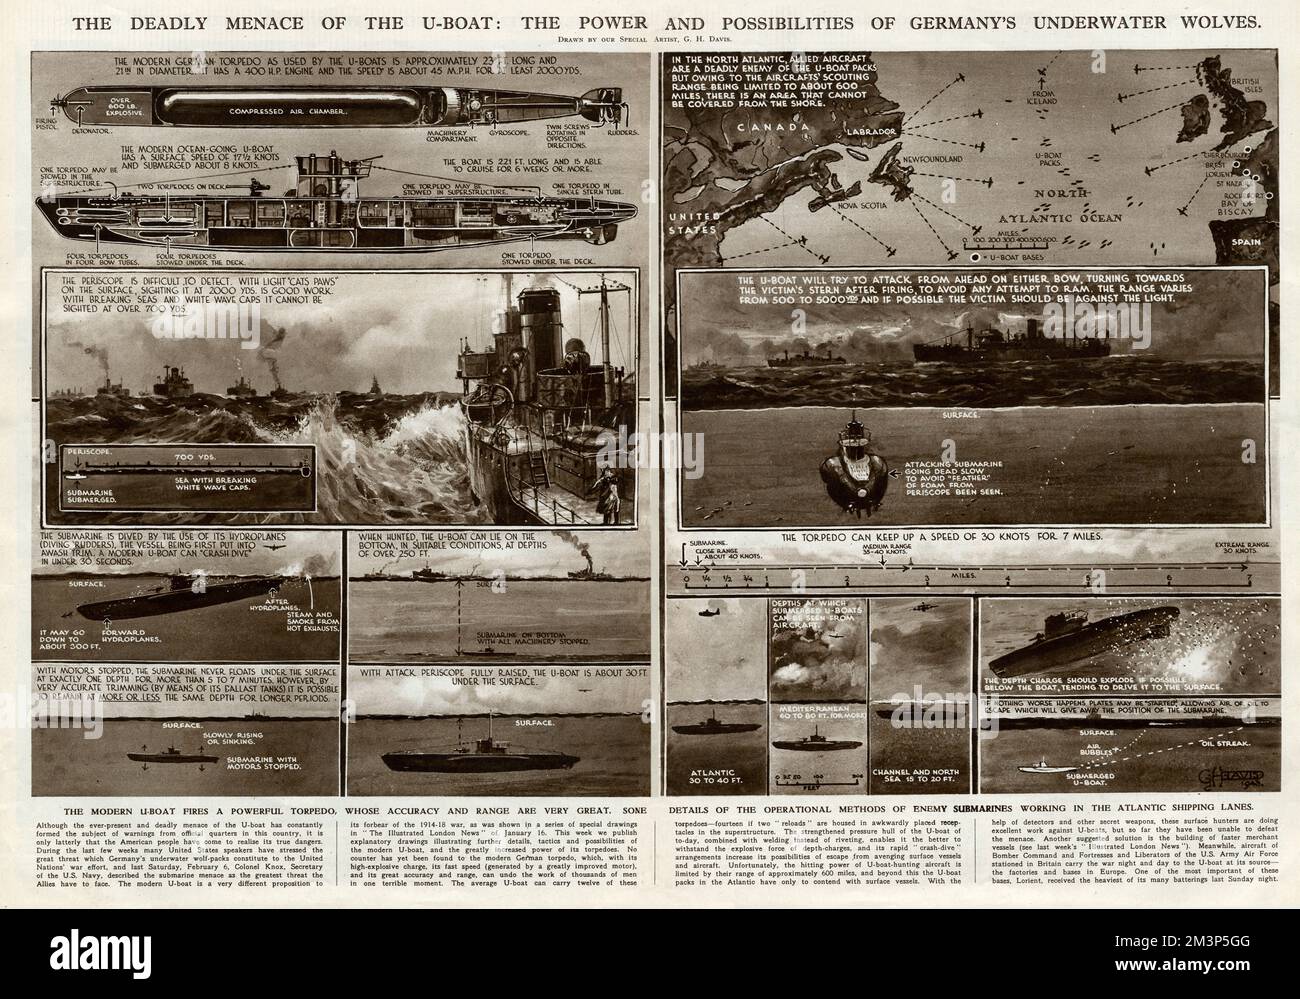 The deadly menace of the U-boat: the power and possibilities of Germany's underwater wolves.  Some details of the operational methods of enemy submarines working in the Atlantic shipping lanes during the Second World War.  Torpedoes fired are powerful, with great range and accuracy.      Date: 1943 Stock Photo